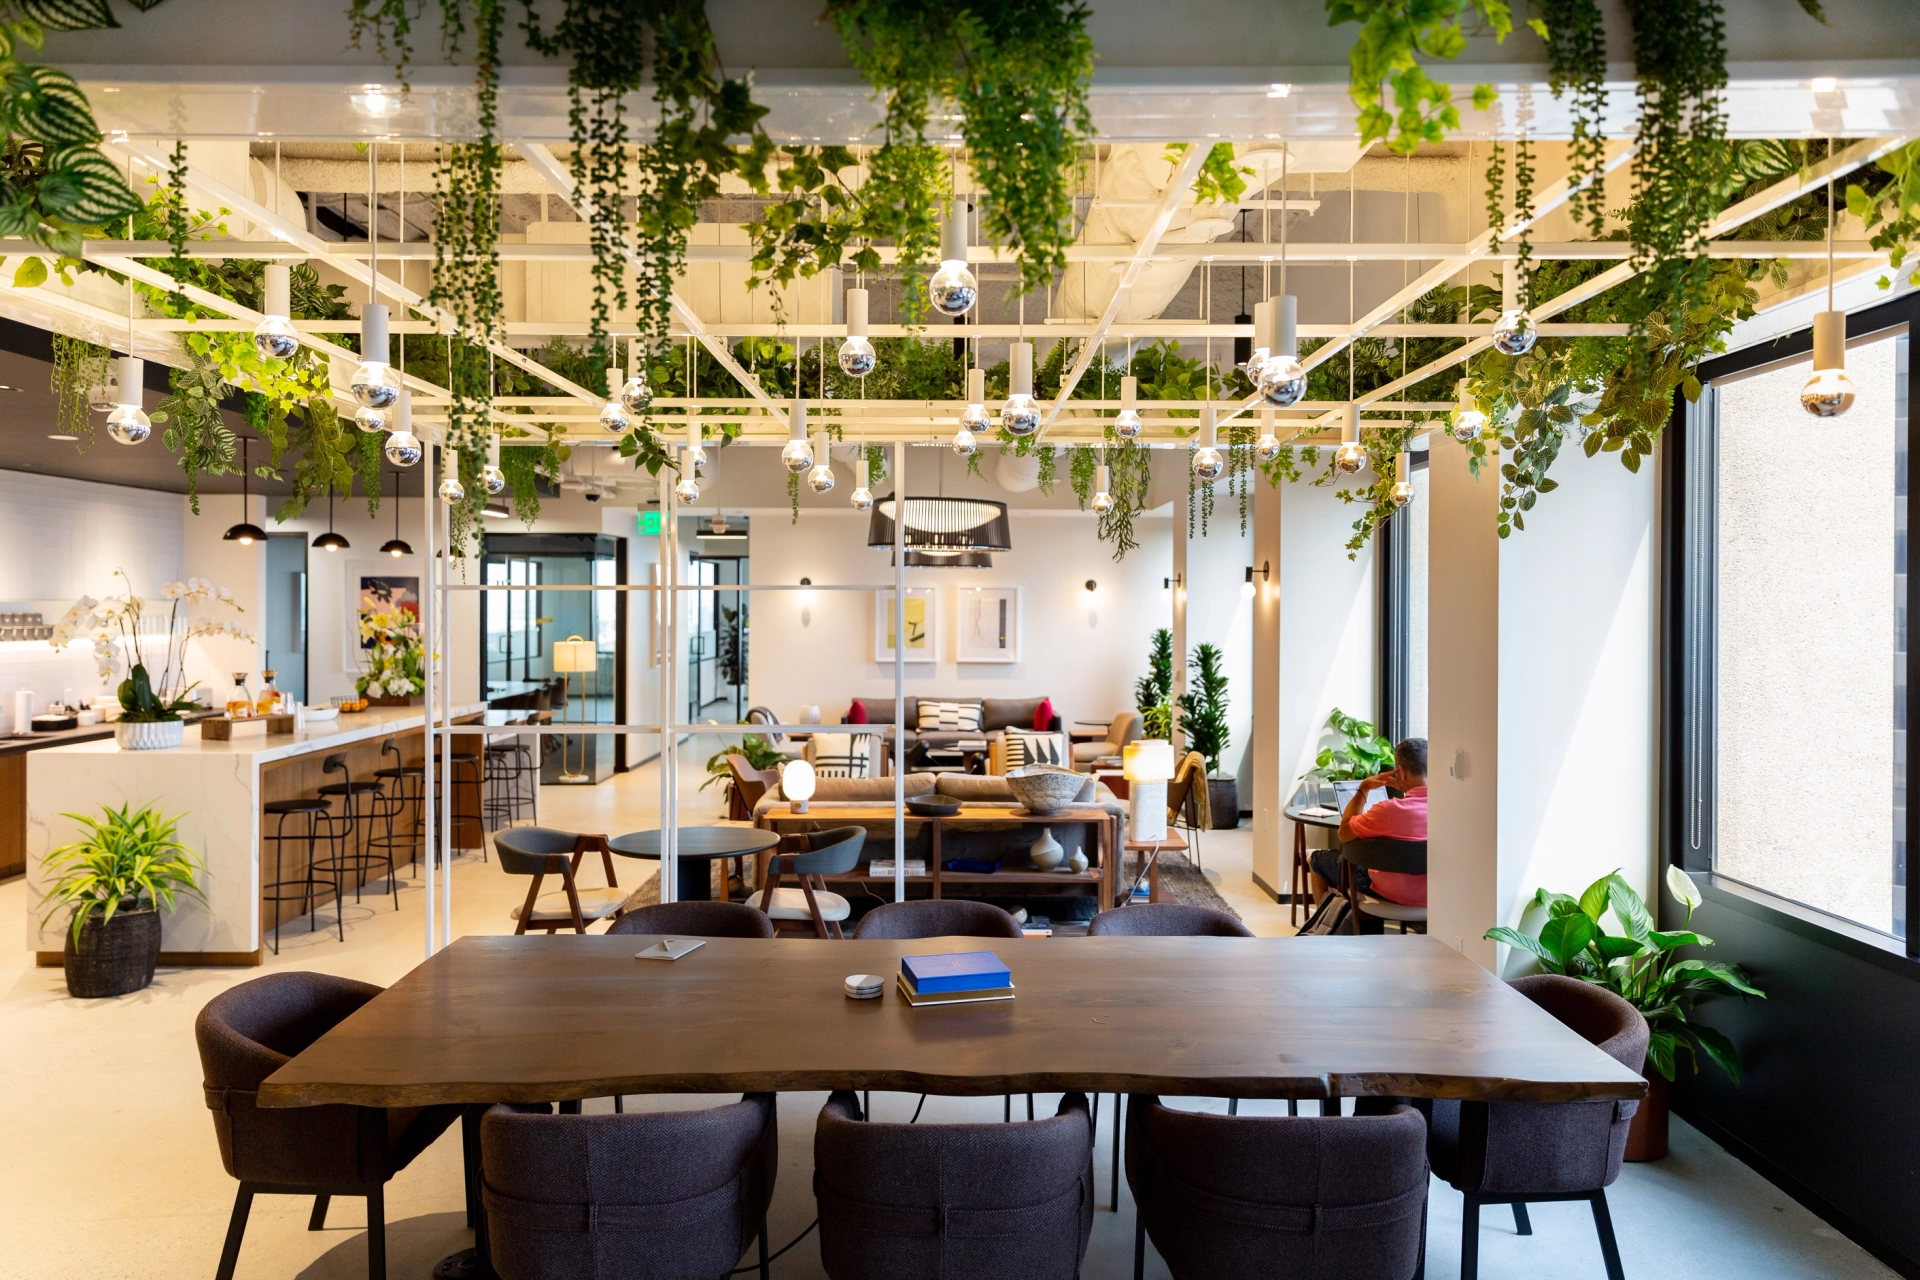 An office workspace in Los Angeles adorned with hanging plants from the ceiling.